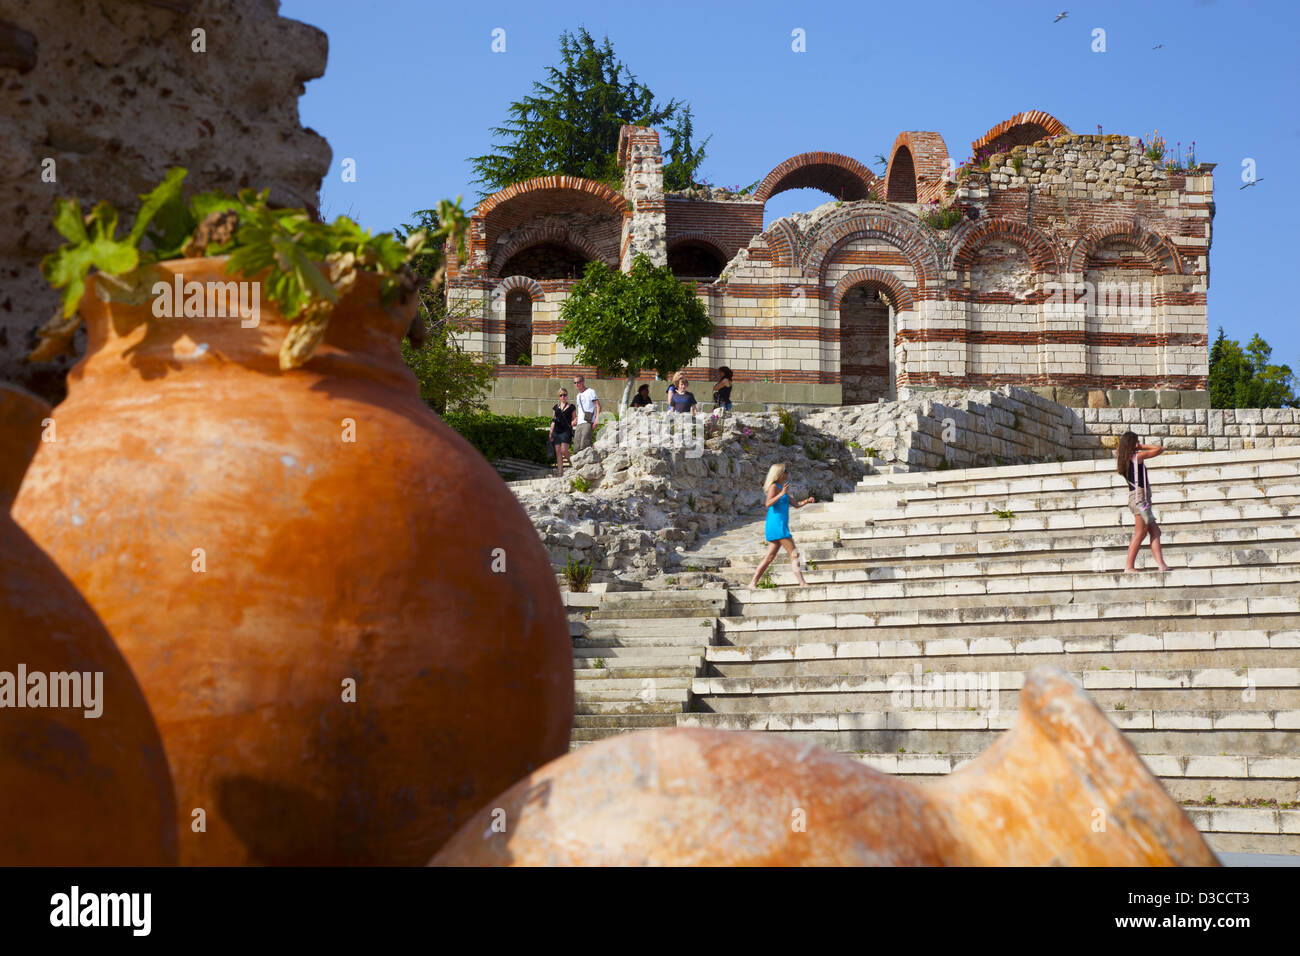 Bulgaria, Europe, Black Sea, Nessebar, Old Town, Ruins Of The Church St. John Aliturgetos, Pottery Pots In Foreground Stock Photo